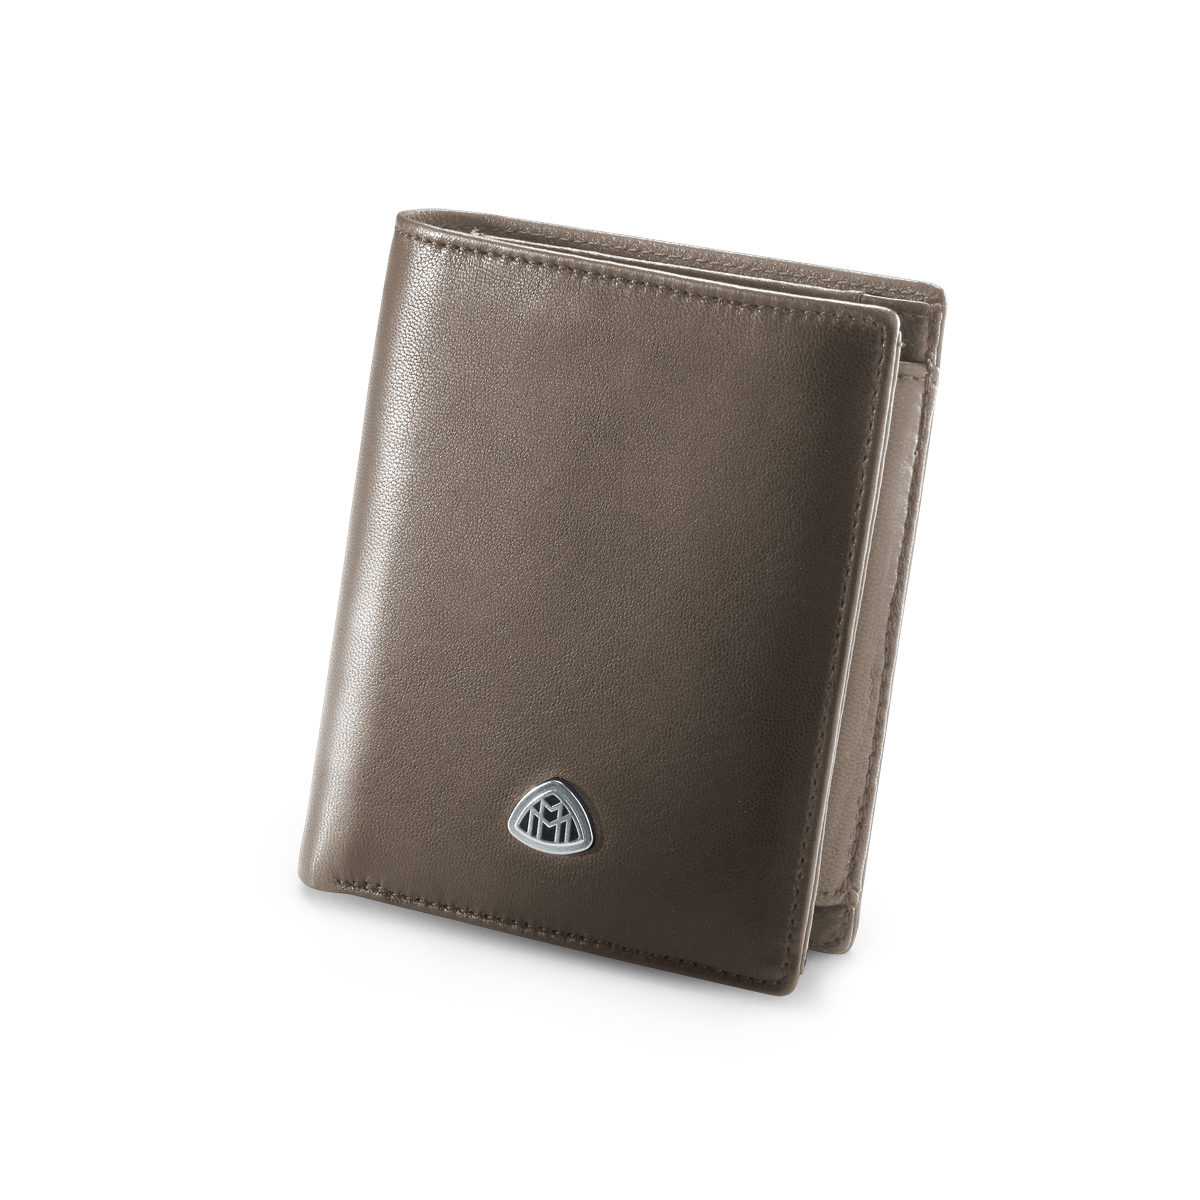 OPTIC HOUSE_MAYBACH Boutique 60 THE TREASURER II Wallet medium nut brown_1